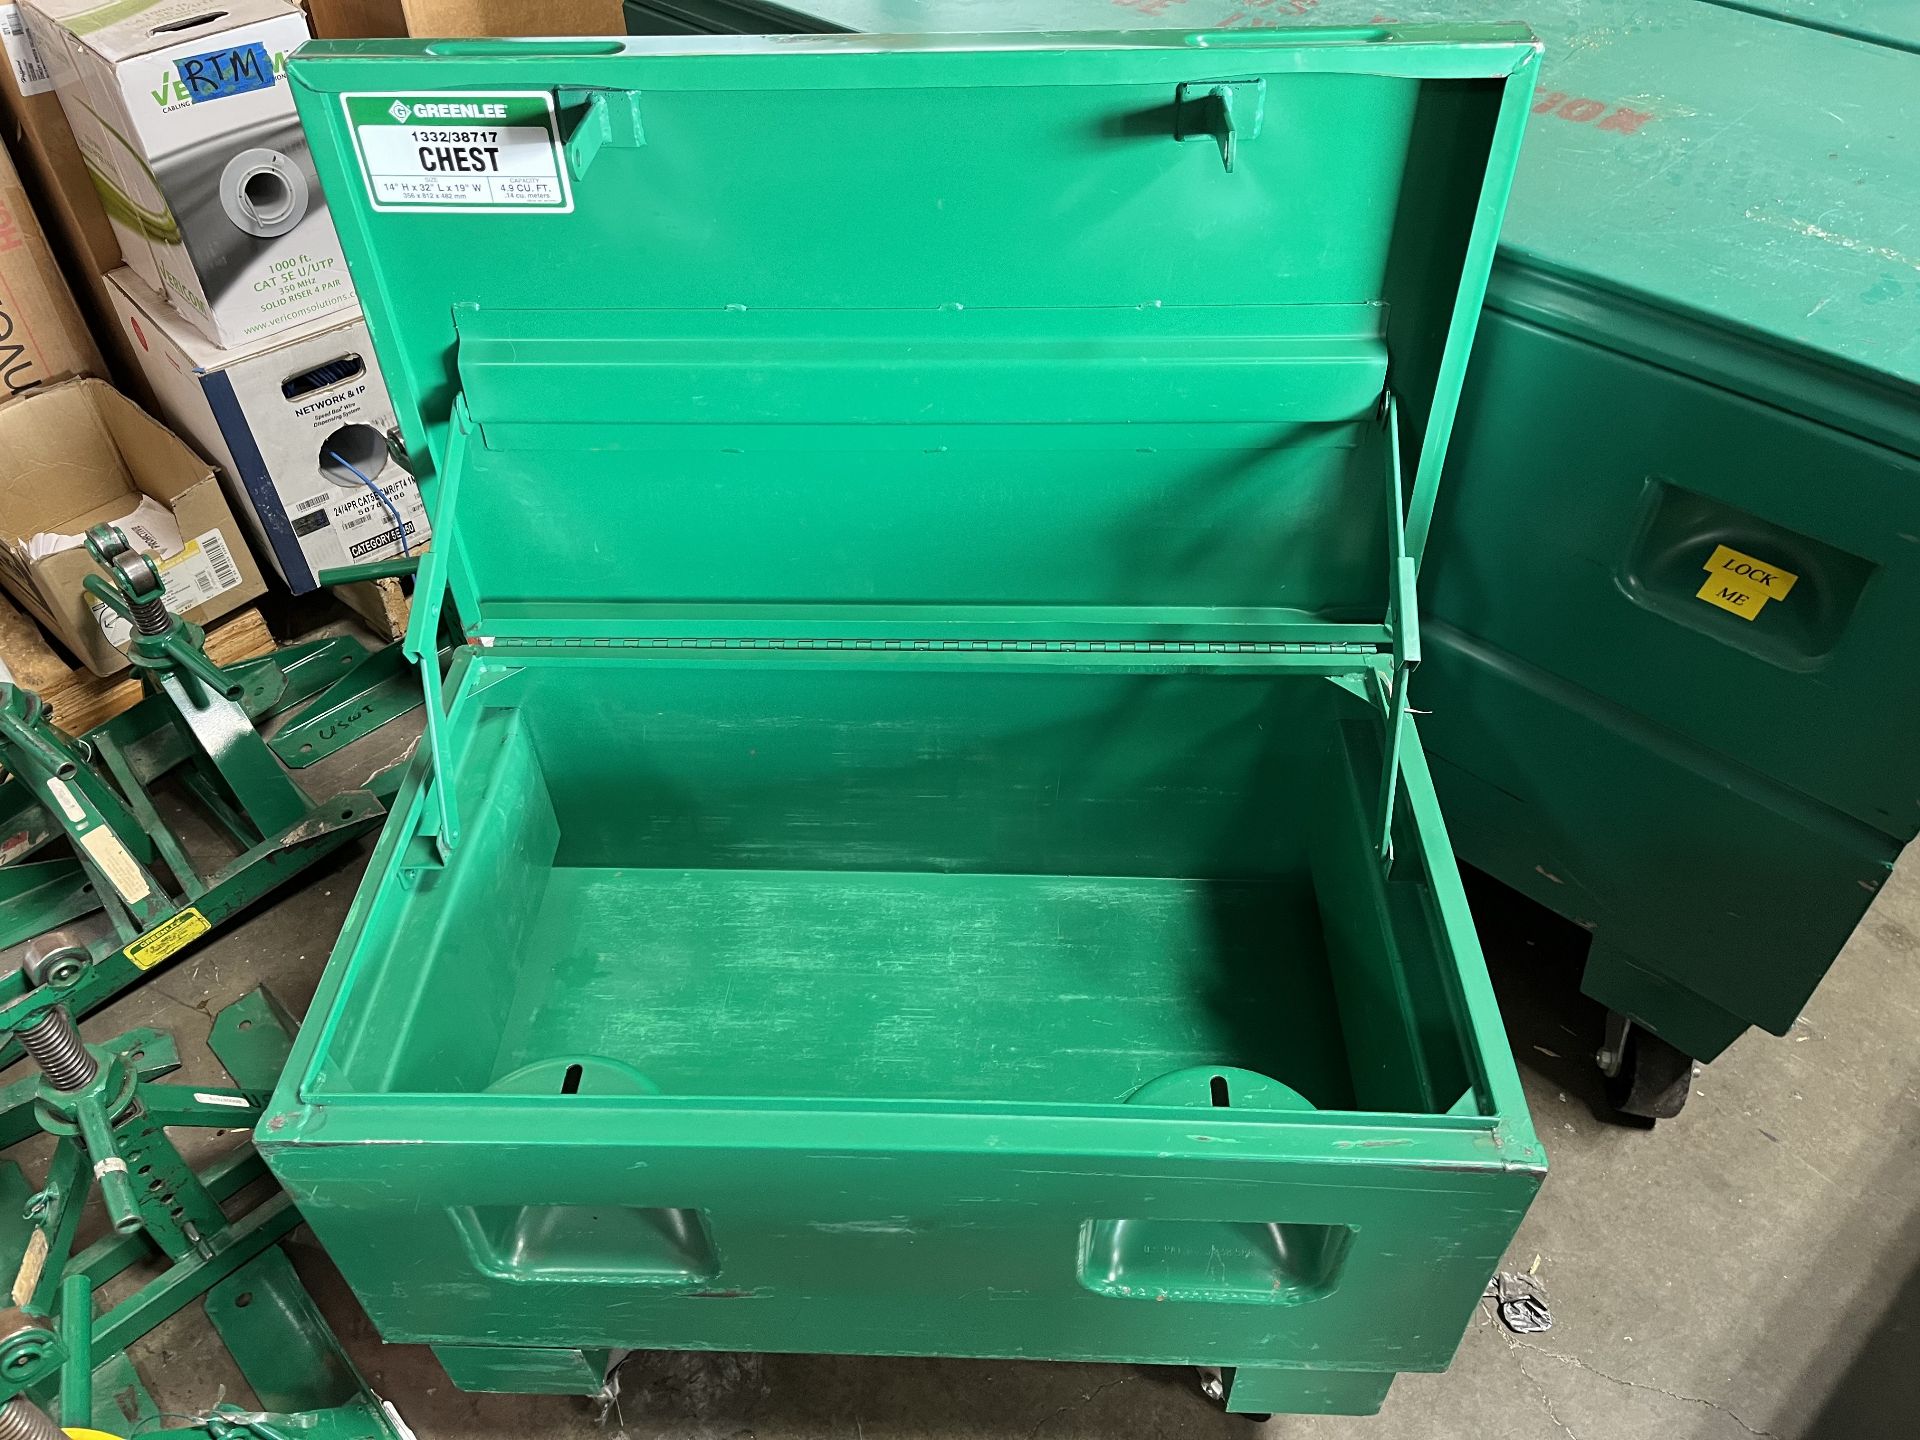 Greenlee 14" X 32" X 19" Job Box on casters Model 1332/38717 - Image 2 of 2